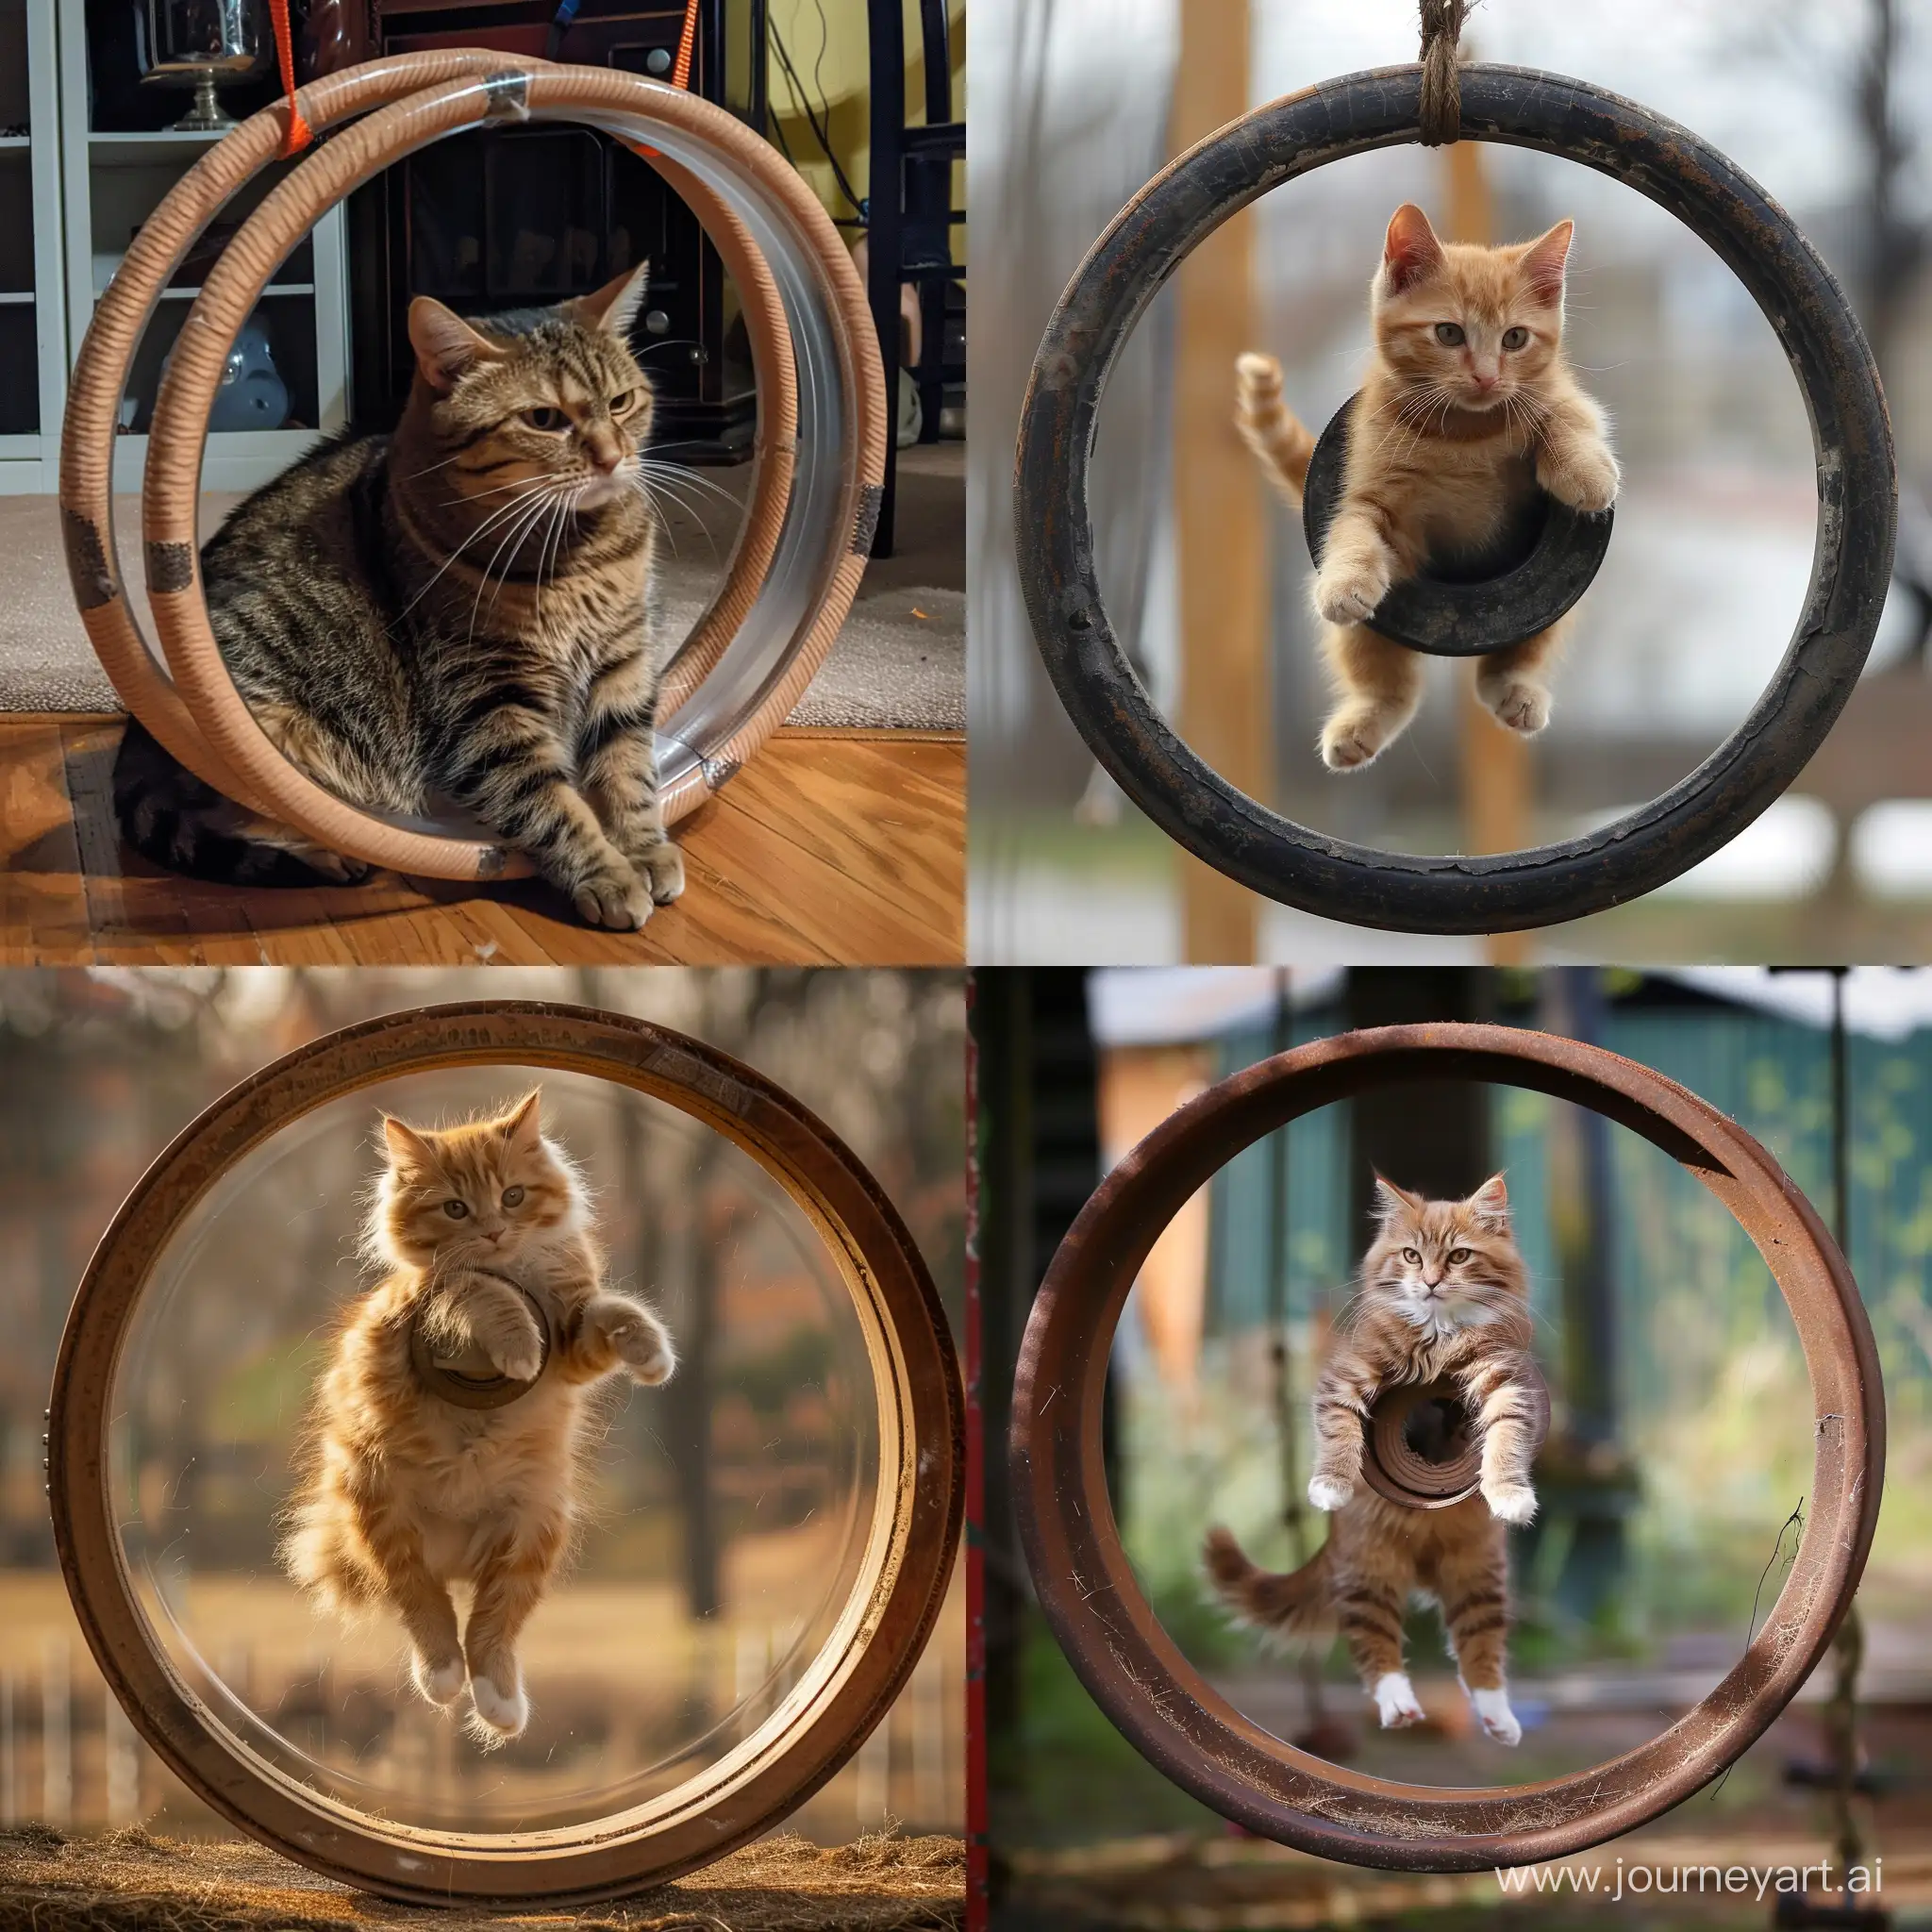 Wheel gymnastics with cat in the wheel